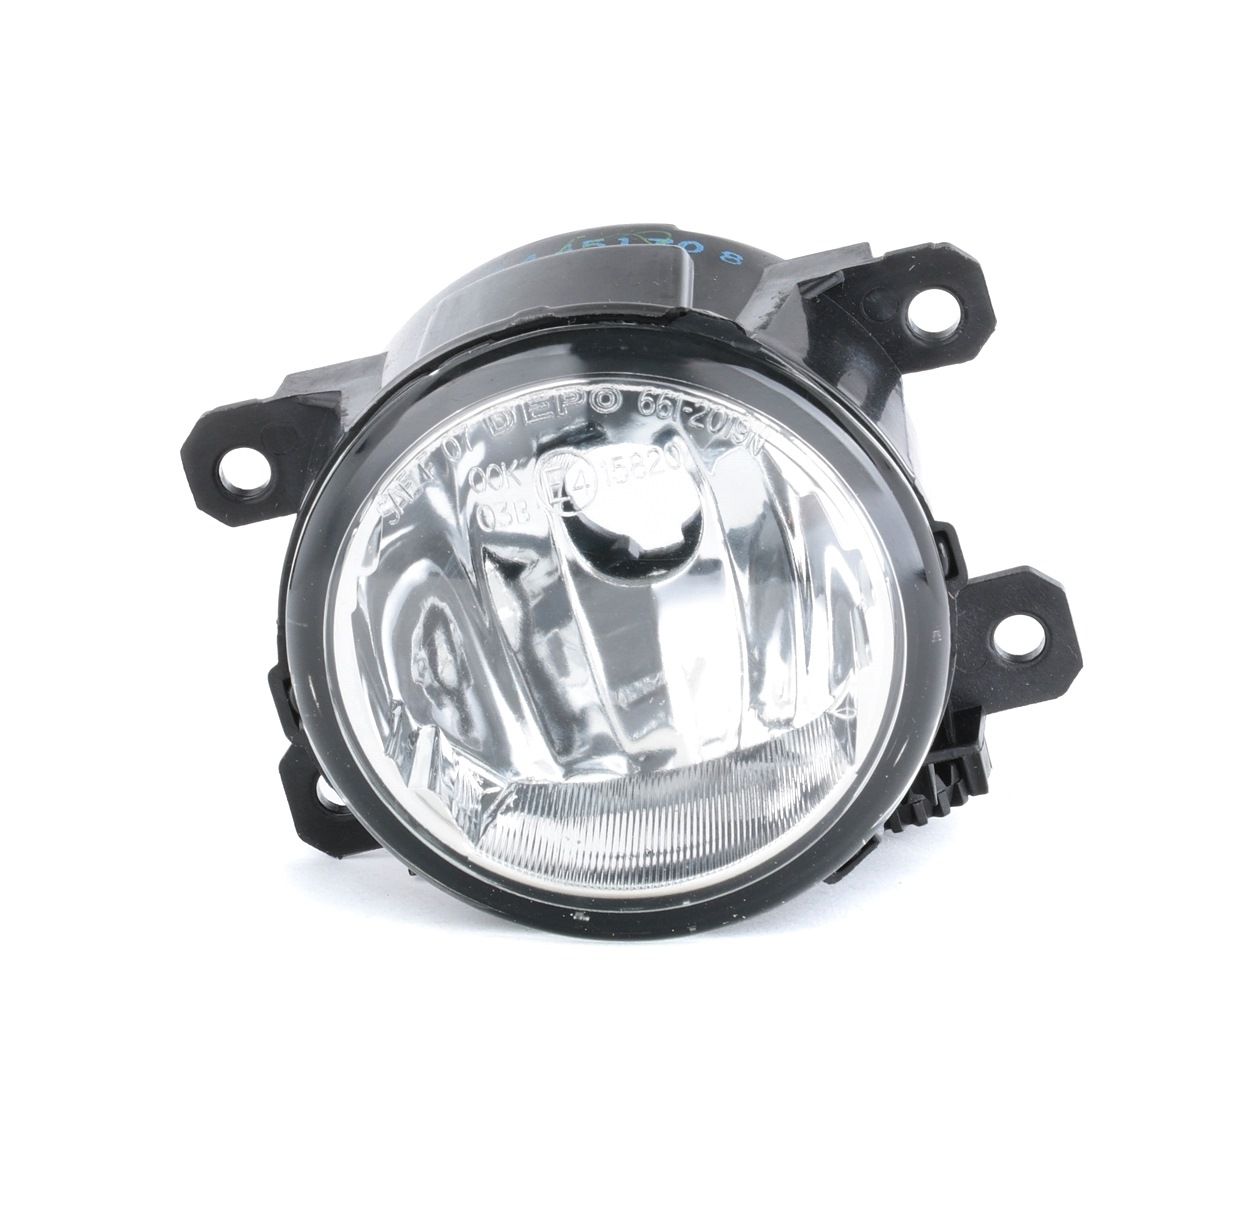 ABAKUS 661-2019N-UQ Fog Light ROVER experience and price